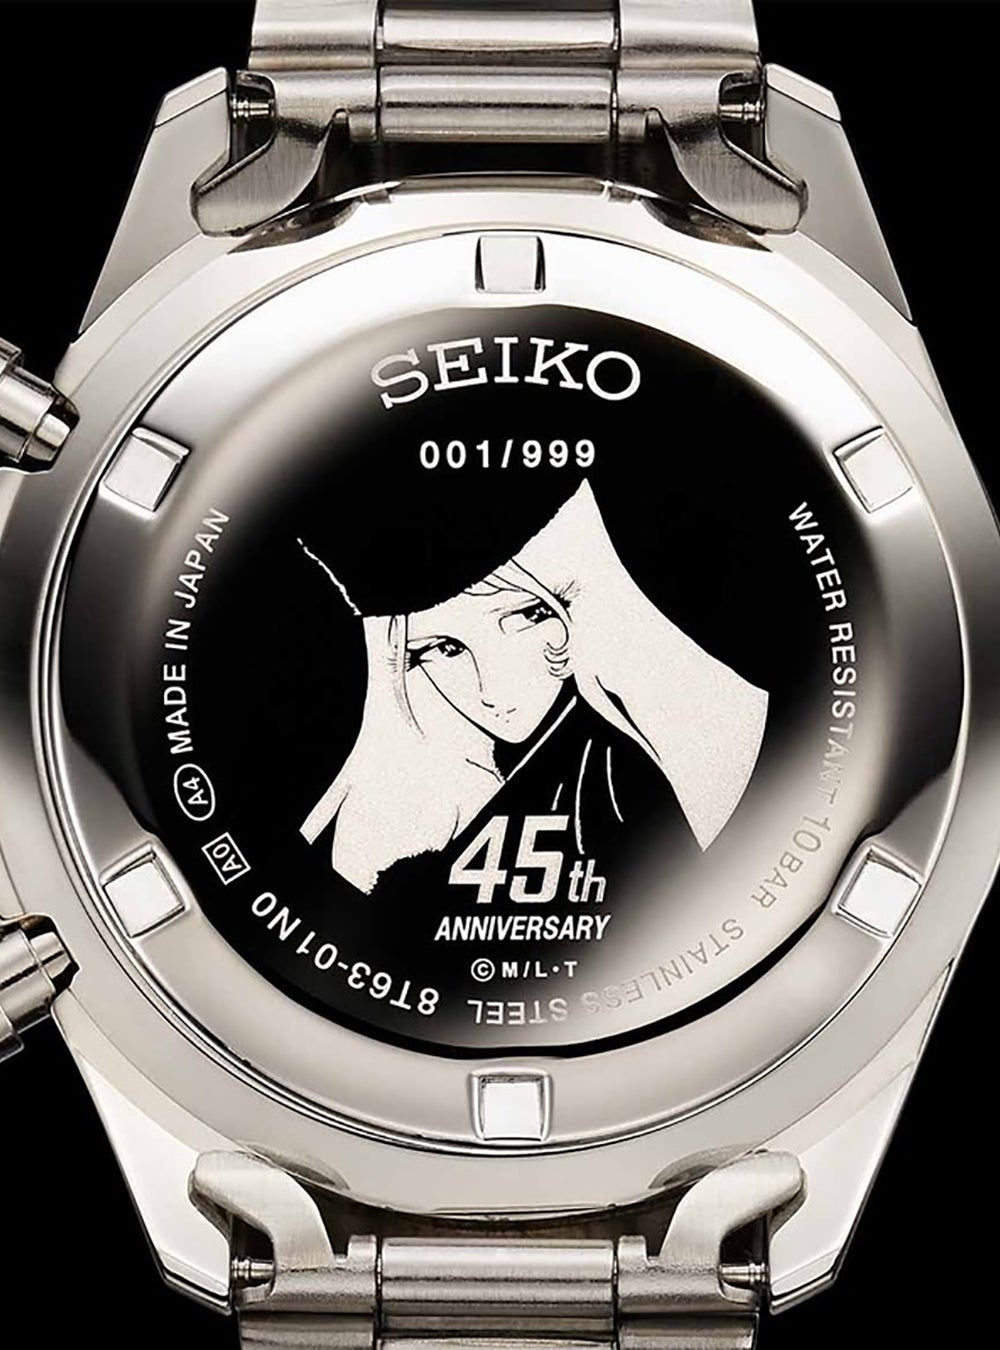 SEIKO GALAXY EXPRESS 999 45TH ANNIVERSARY WATCH LIMITED EDITION MADE IN JAPANWRISTWATCHjapan-select